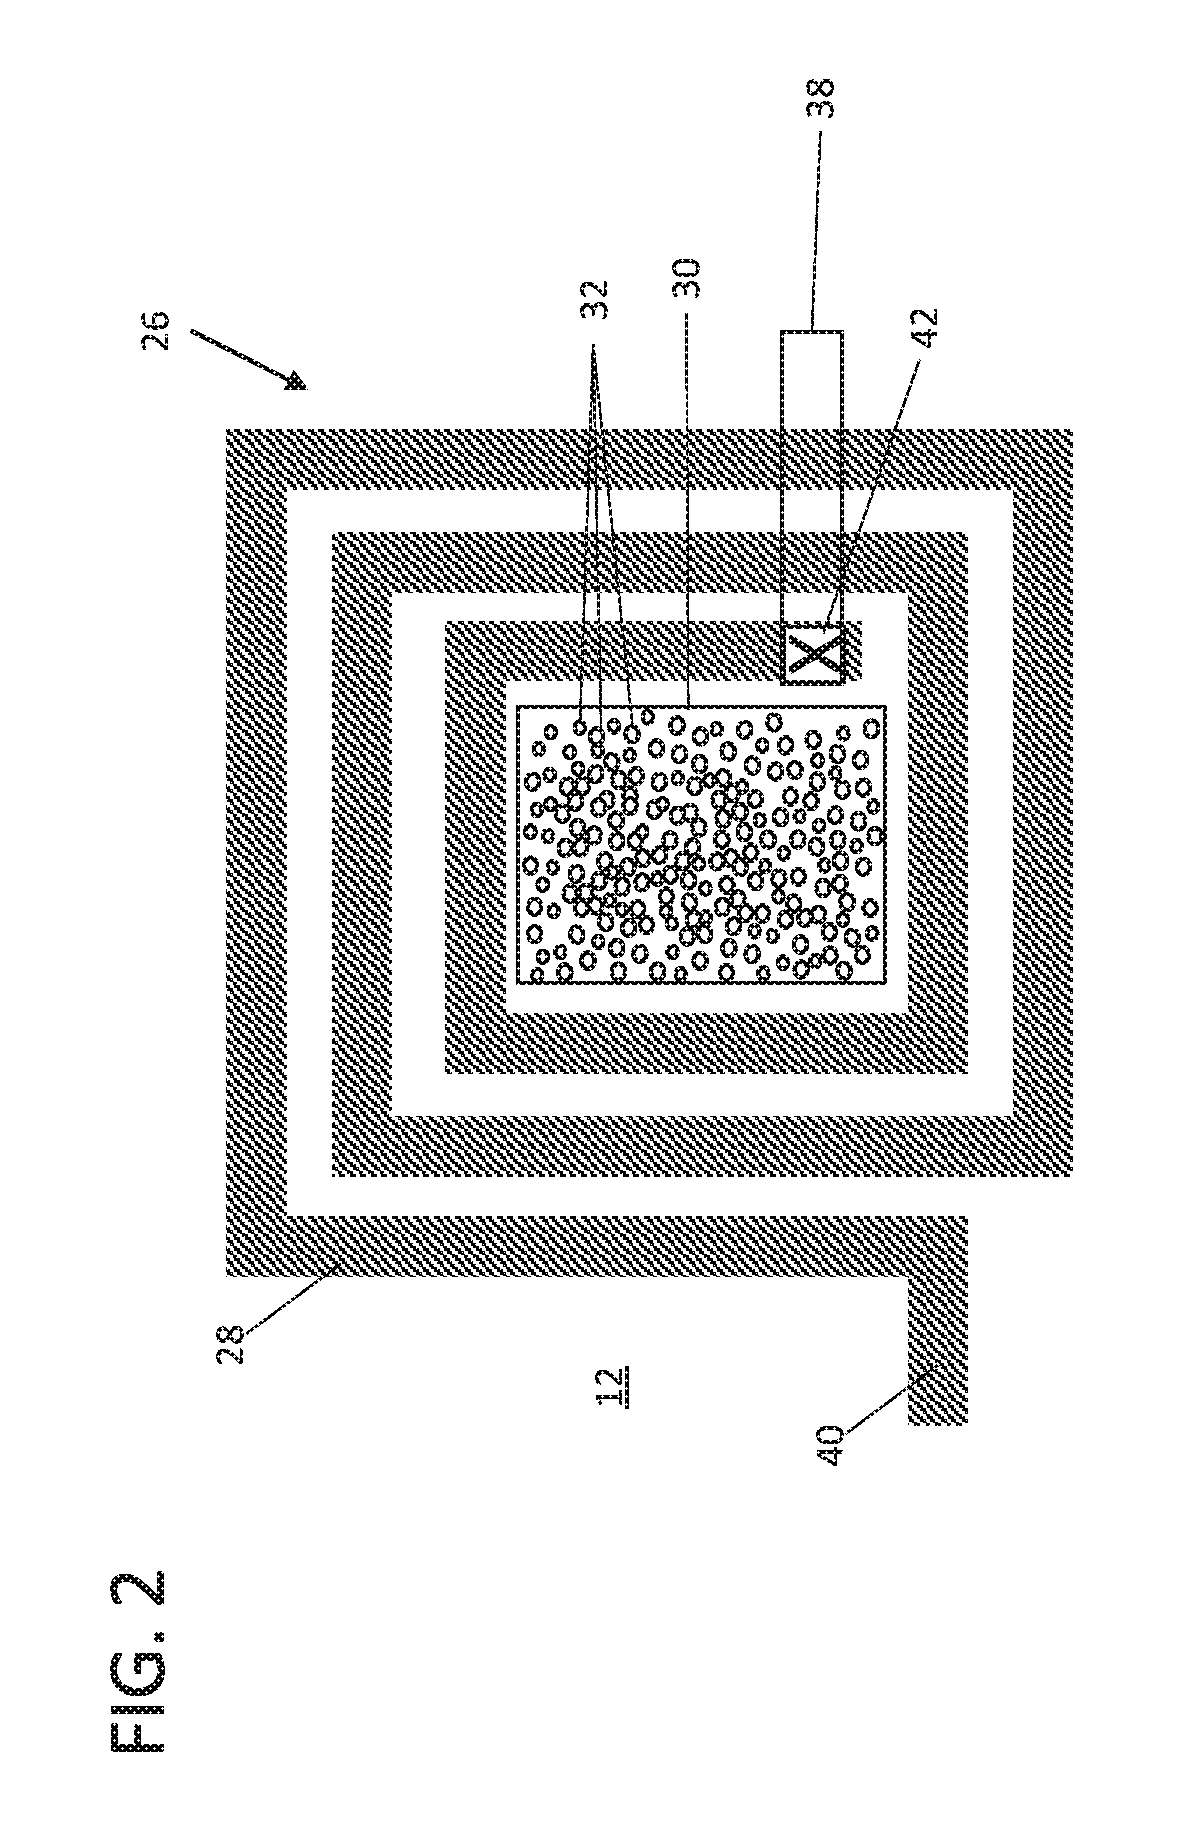 Inductors in beol with particulate magnetic cores